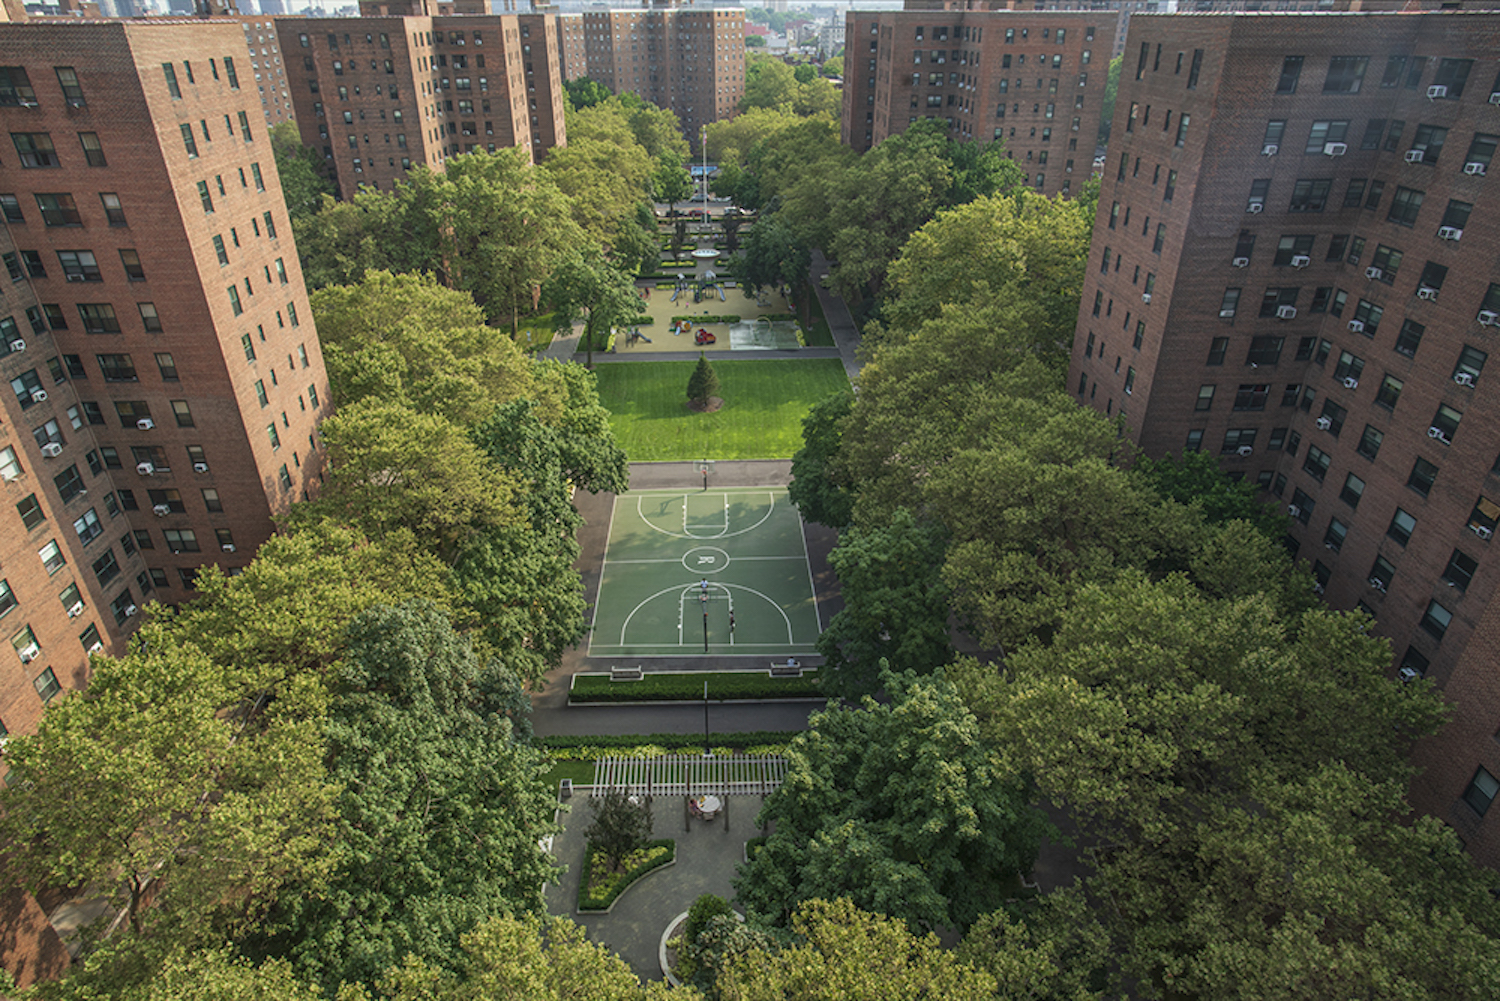 Riverton Square in East Harlem, Manhattan. Image courtesy of NYC Housing Connect